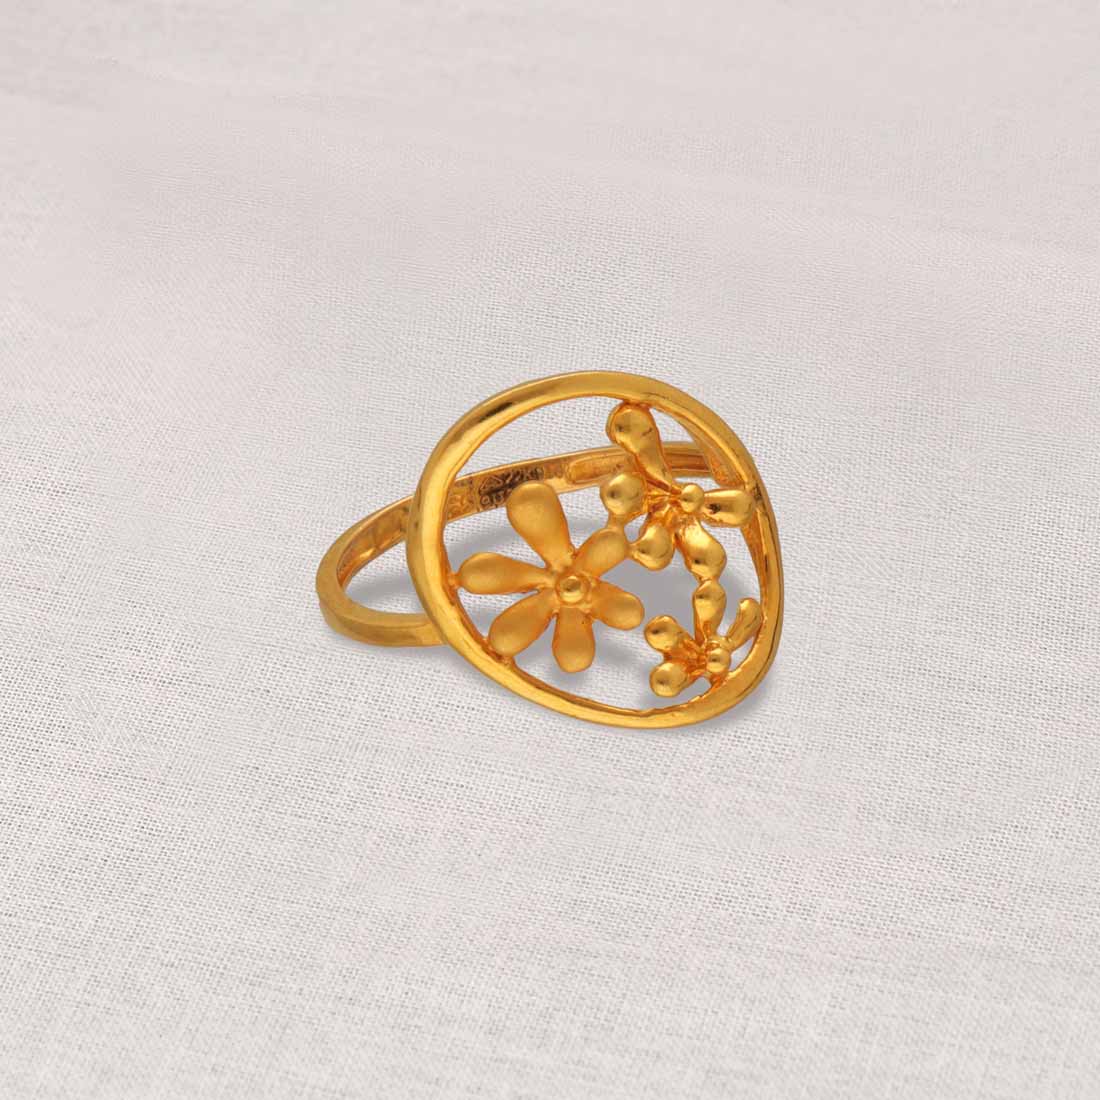 Heart Ring Rose Gold - #fashion #style #heart #delicatering #jewelry  #rosegold #picoftheday #accessories - 1… | Fashion jewelry, Jewelry, Heart  shaped wedding rings